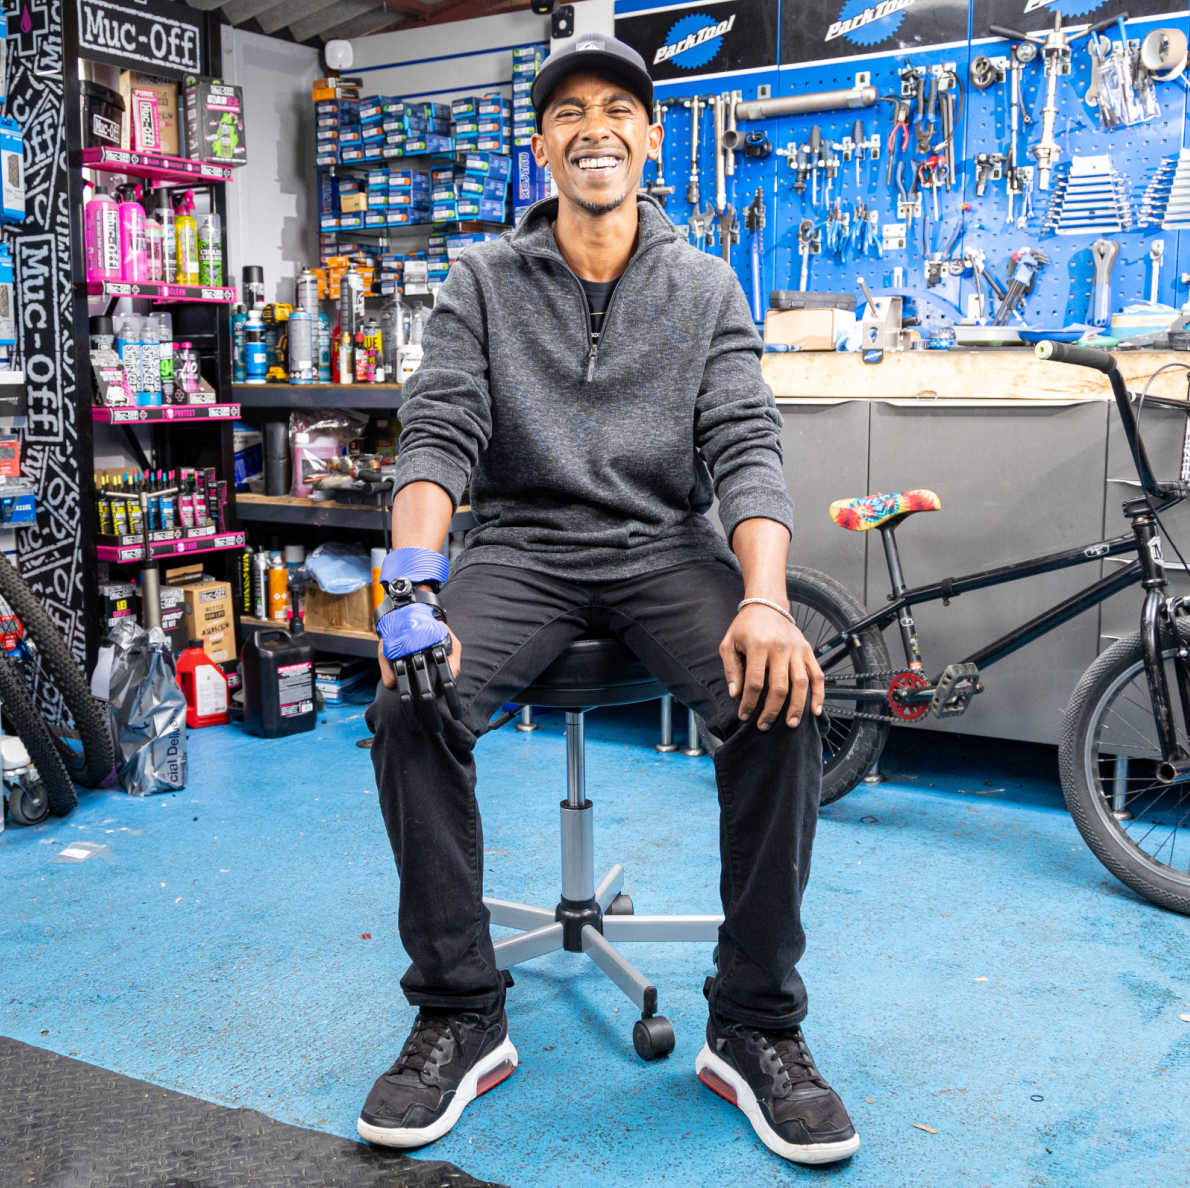 “When I put the Hero Gauntlet on, it’s instant confidence. I can walk down the road without feeling like I’m going to be judged badly.” This month we are celebrating resilience by sharing voices from our community. Here’s Mo’s story openbionics.com/hero-gauntlet-… #LLLDAM #LLLDAM2024